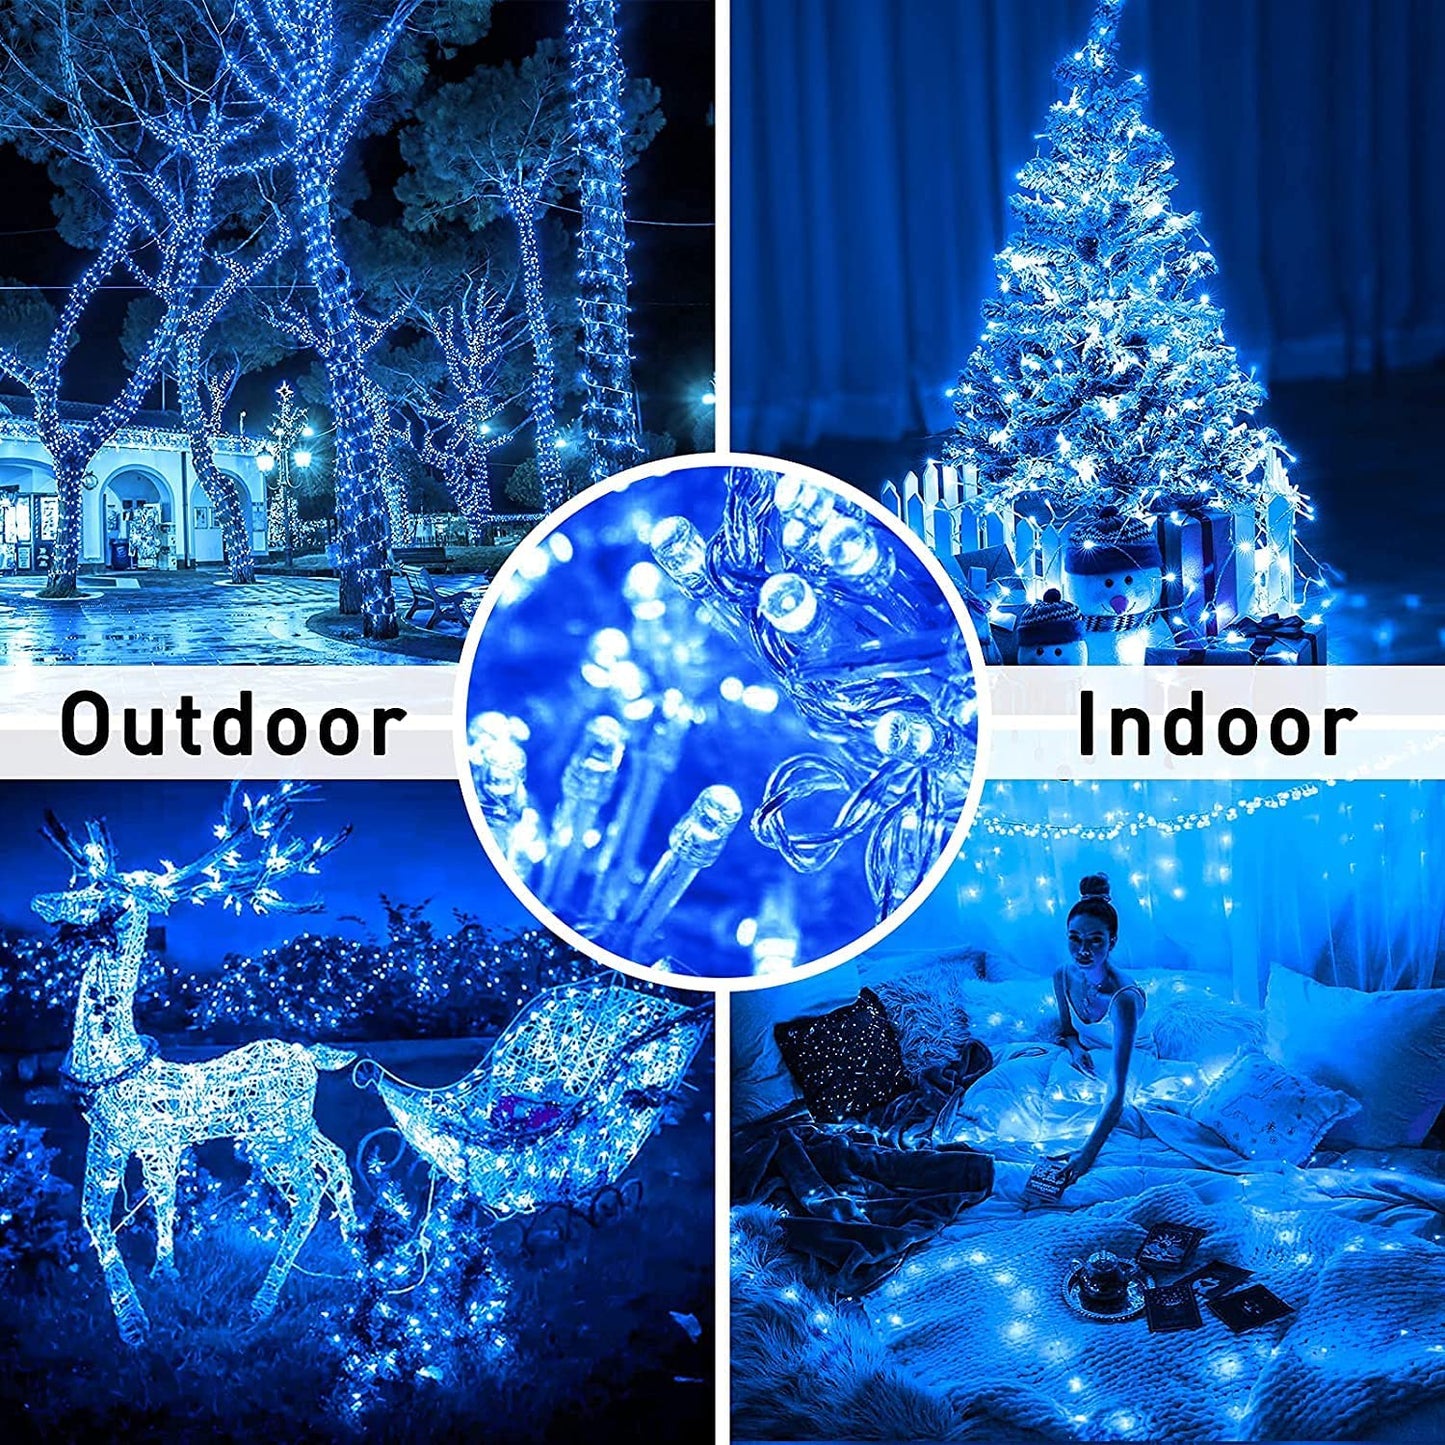 Vibrant blue LED Christmas lights glowing brightly, perfect for creating a magical holiday ambiance.